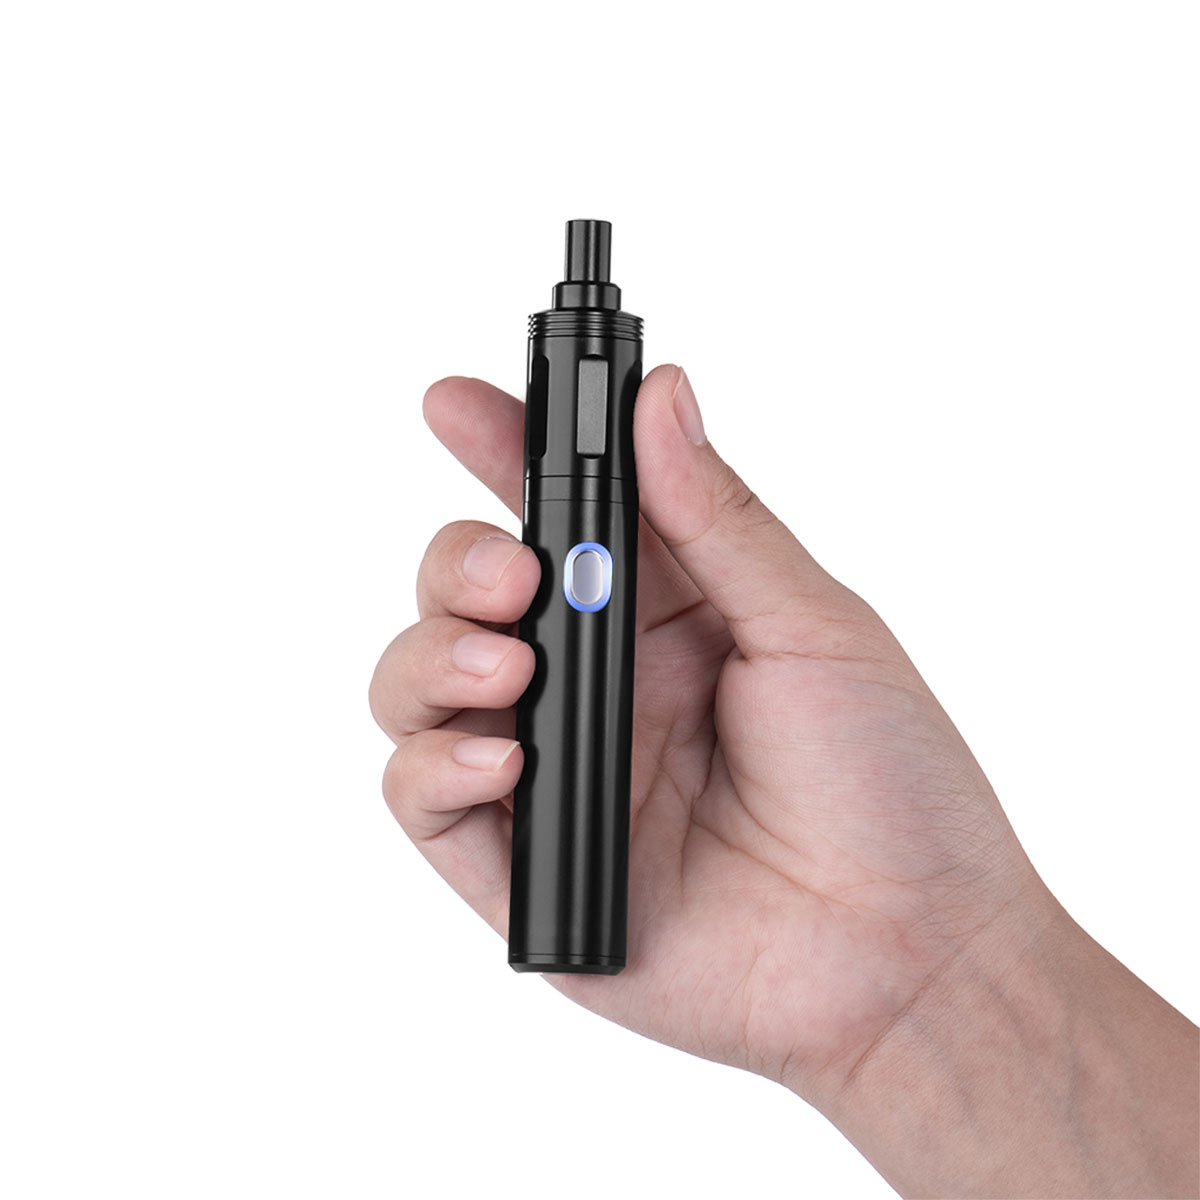 G Pen Connect Tank, gpen, connect vaporizer, thc, , wax, dab, concentrates,  extracts, e-nail, aromatherapy, alternative